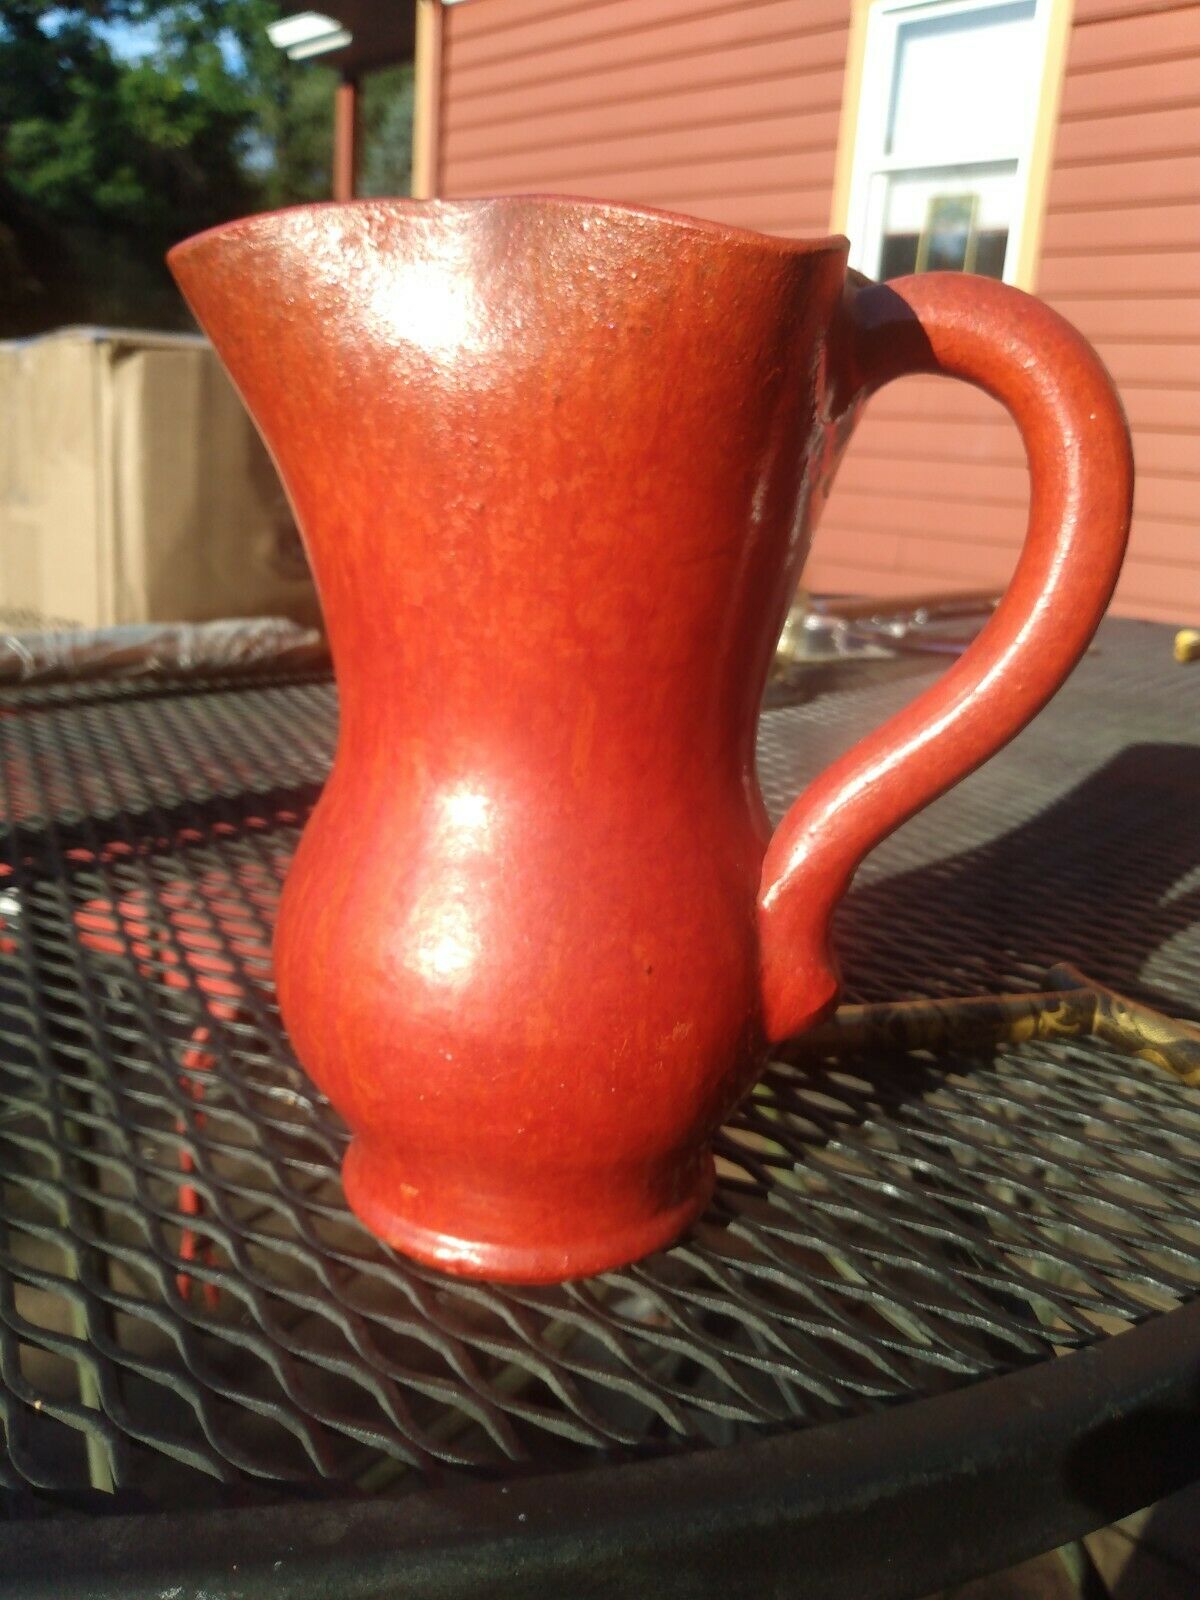 North Carolina Chrome Red Pitcher - Great Color/crystalline